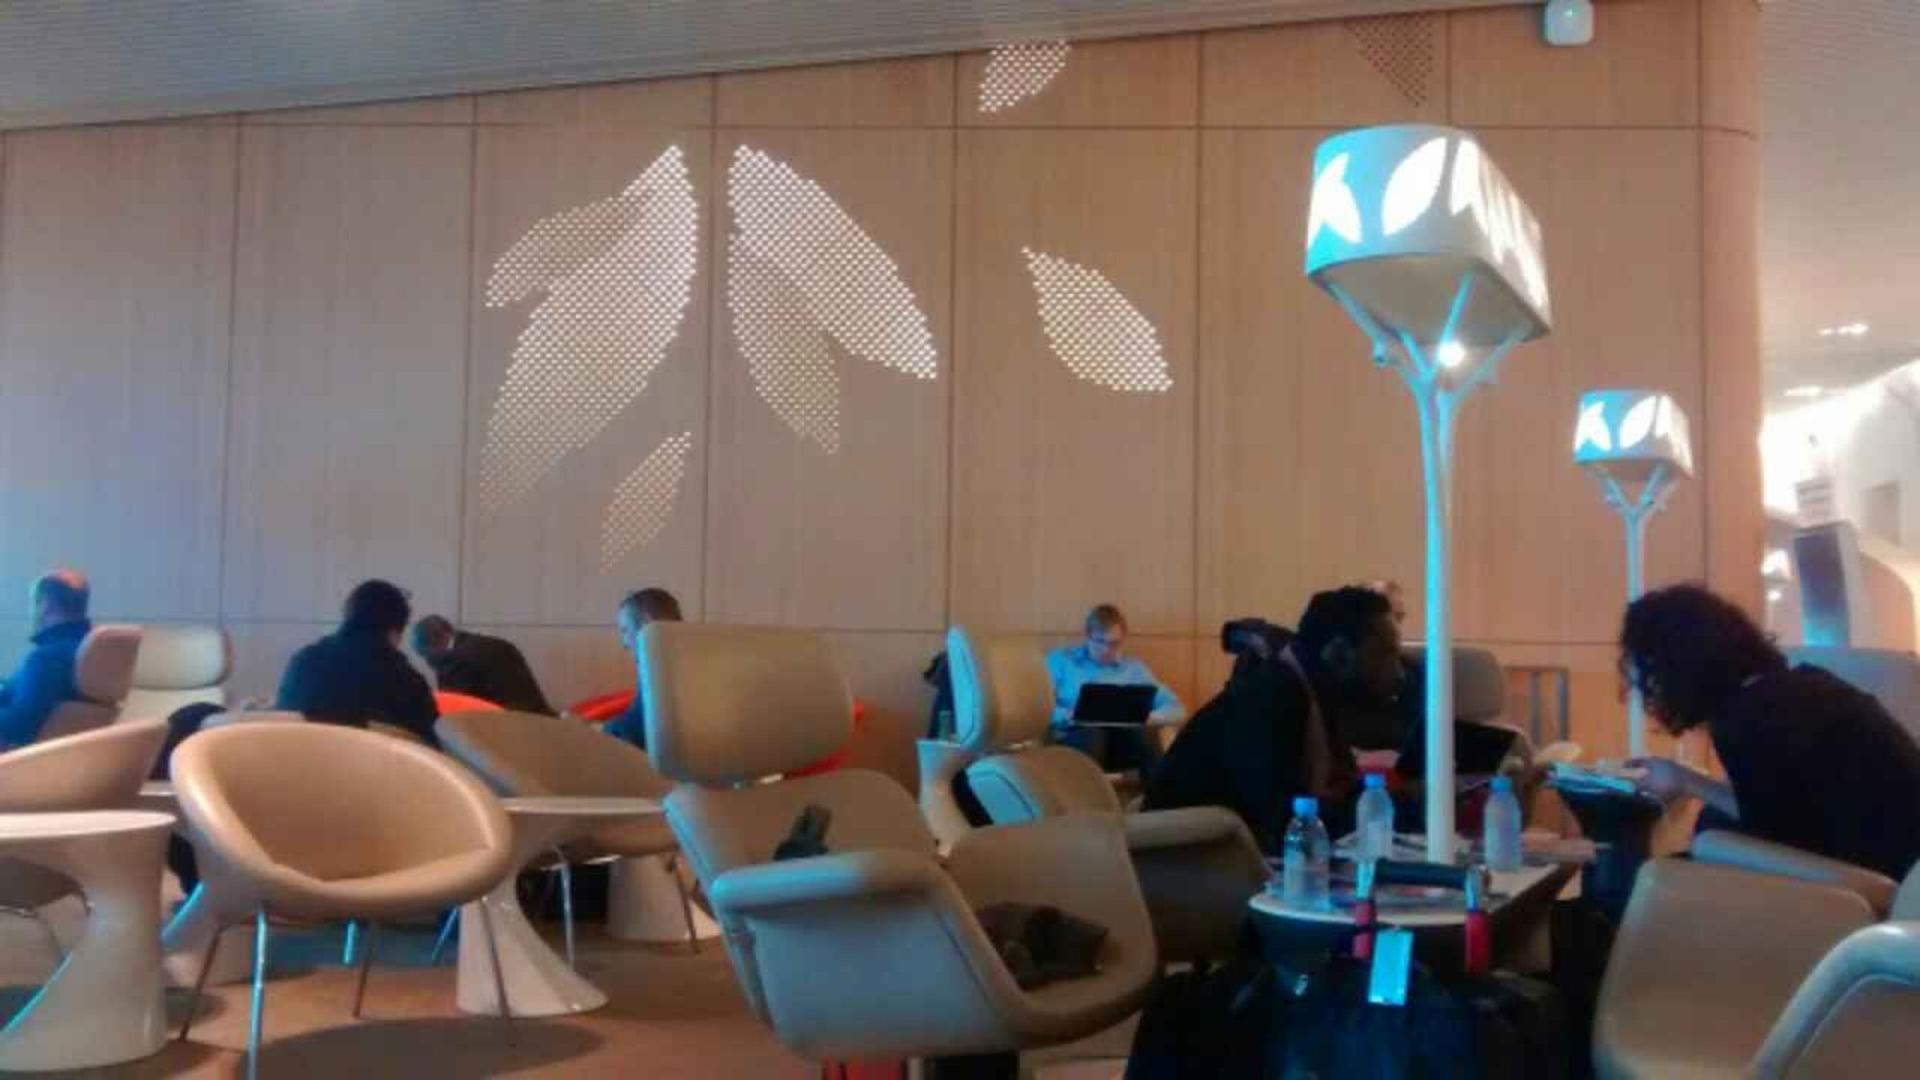 Air France Lounge (Concourse M) image 4 of 17